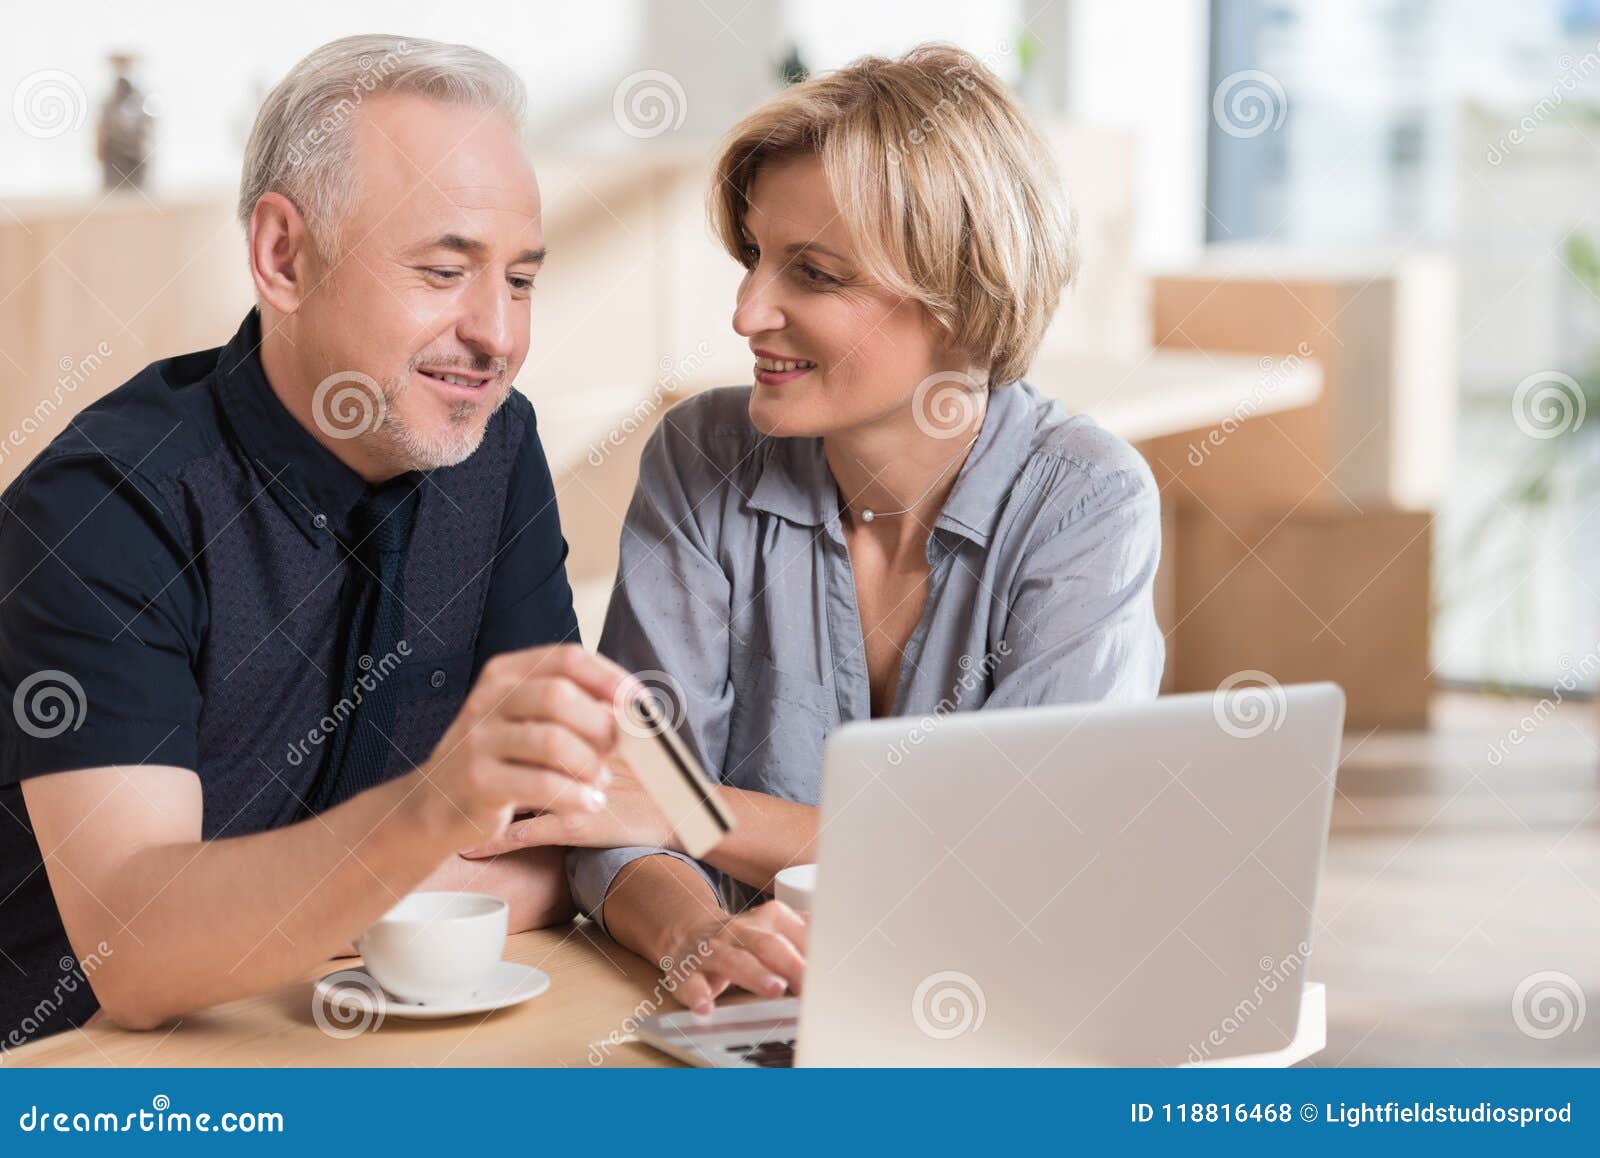 affectionate couple wanting to buy something online and pay